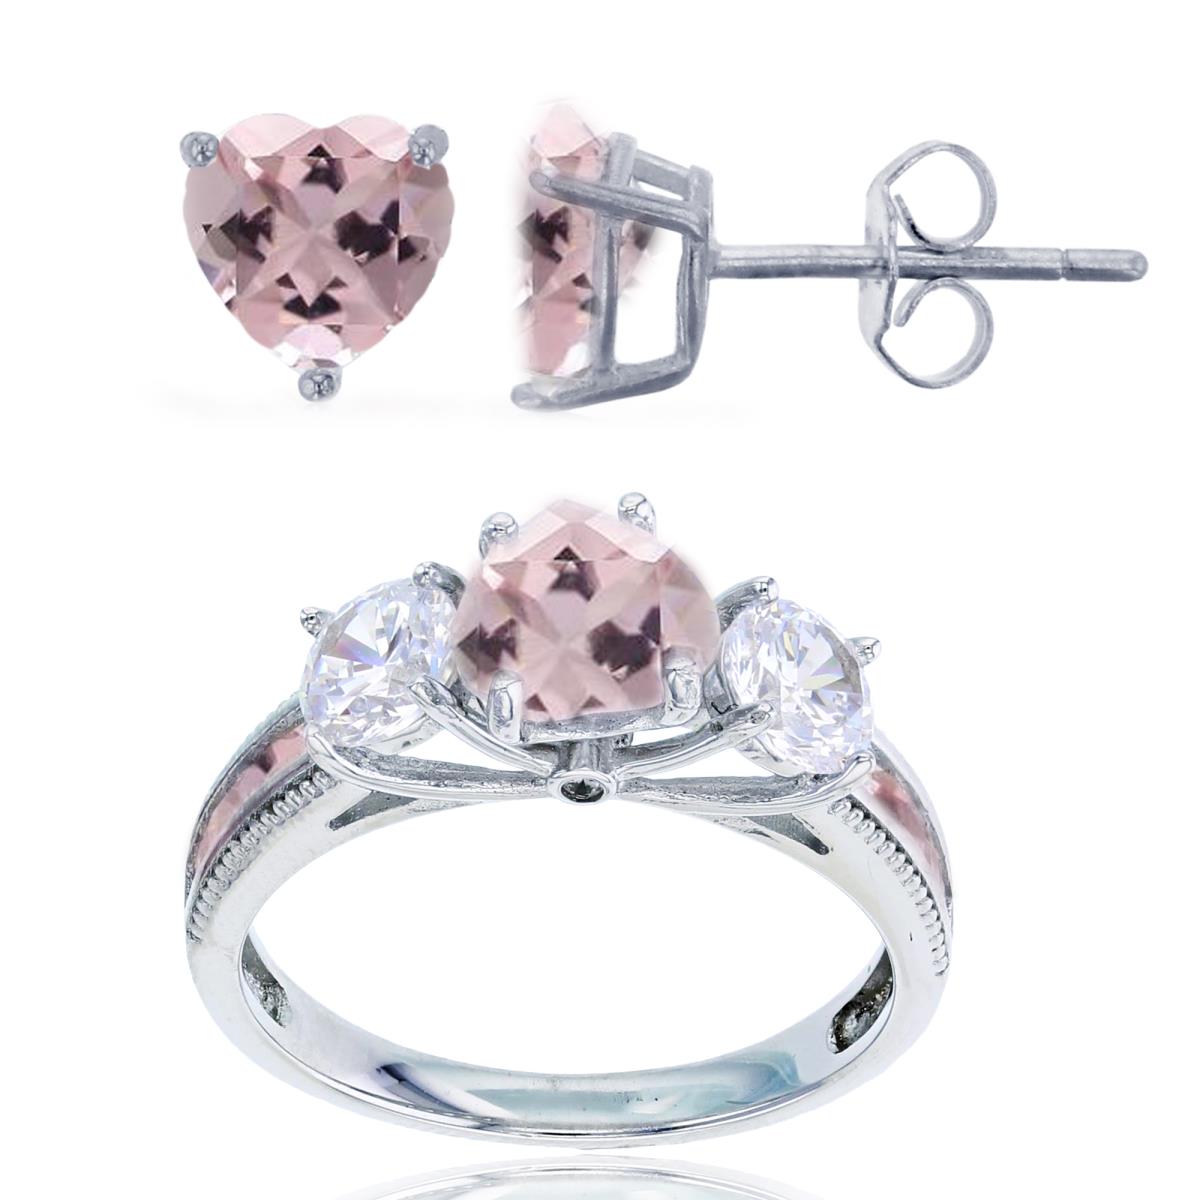 Sterling Silver Rhodium 3-Stone 7mm Morganite Hrt & 5mm Rd CZ Ring & 6mm Hrt Solitaire Stud Earring Set